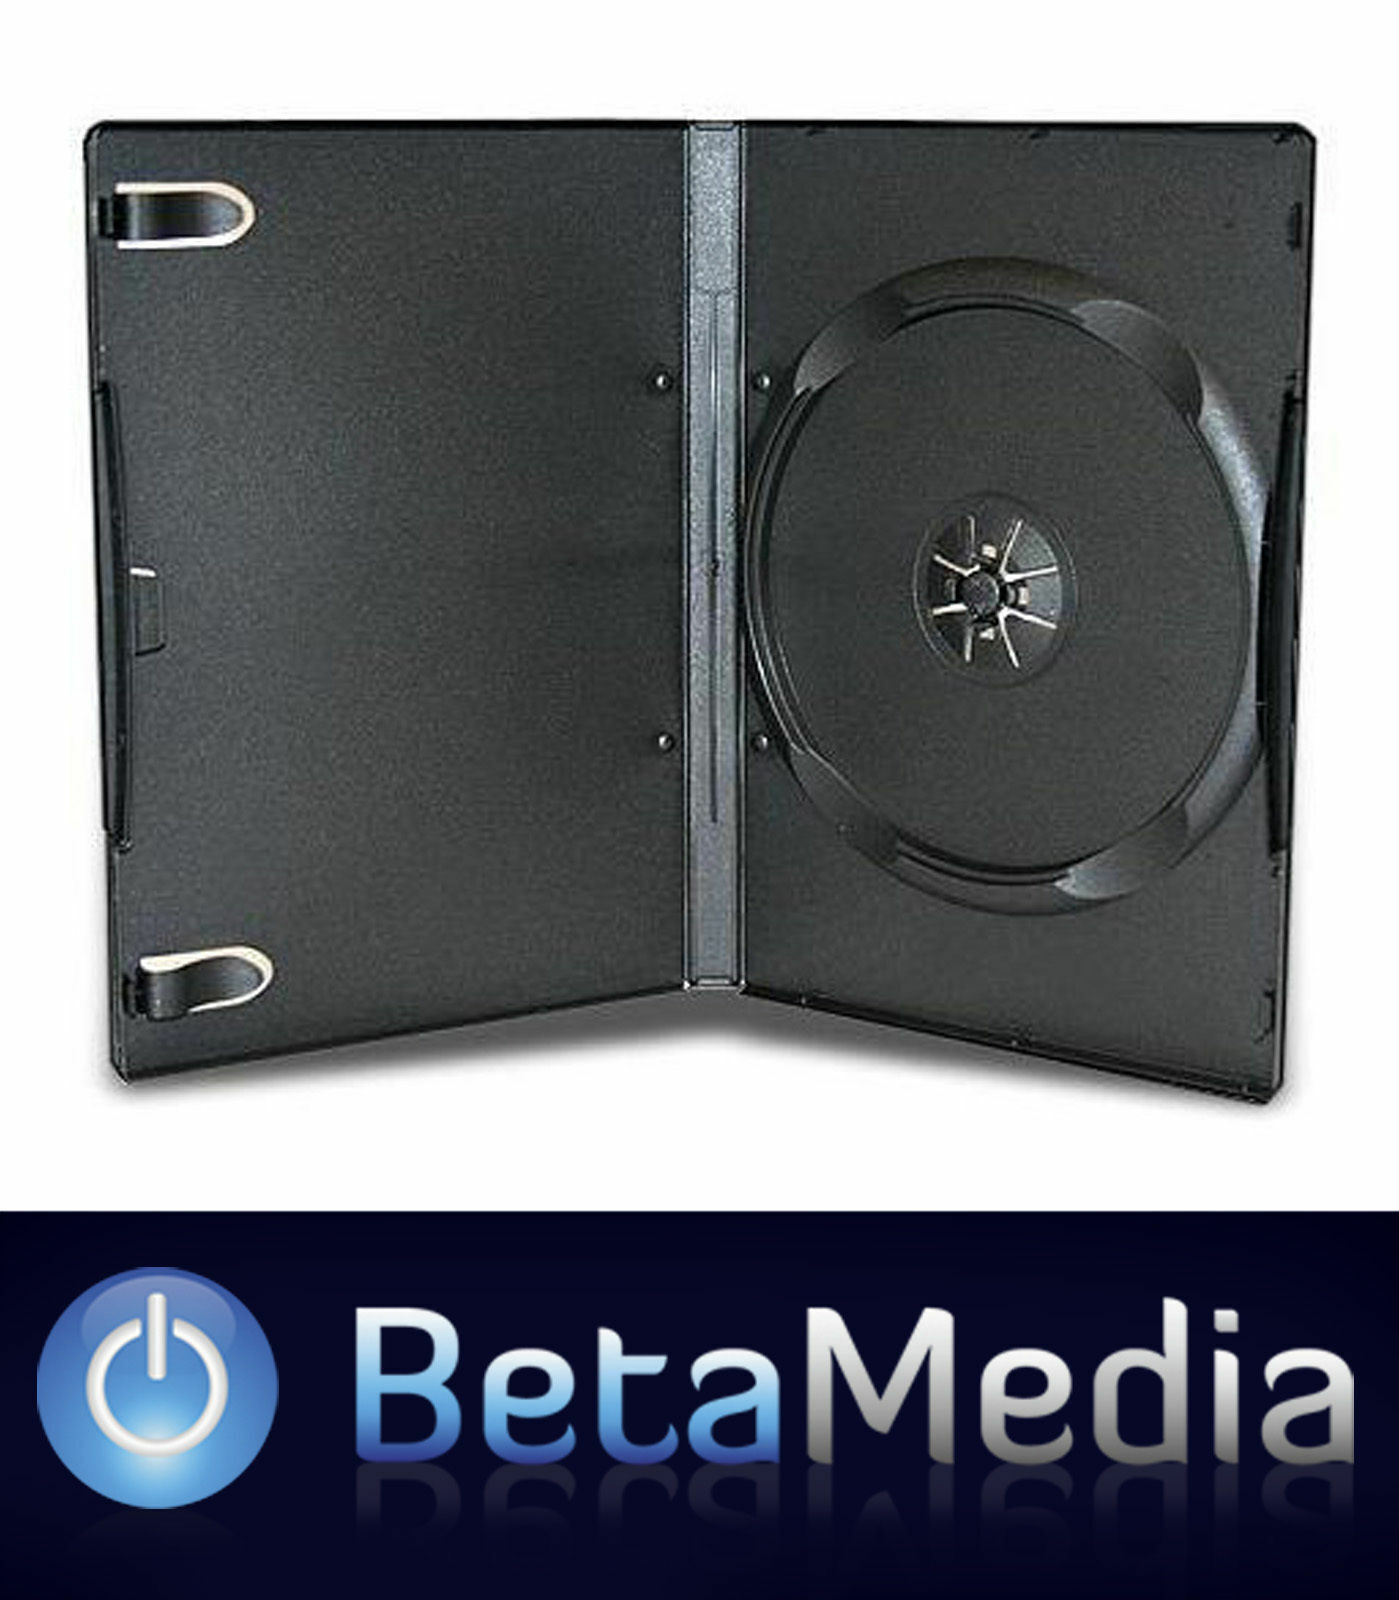 100 x Single Black 14mm Quality CD / DVD Cover Cases - Standard Size DVD case 